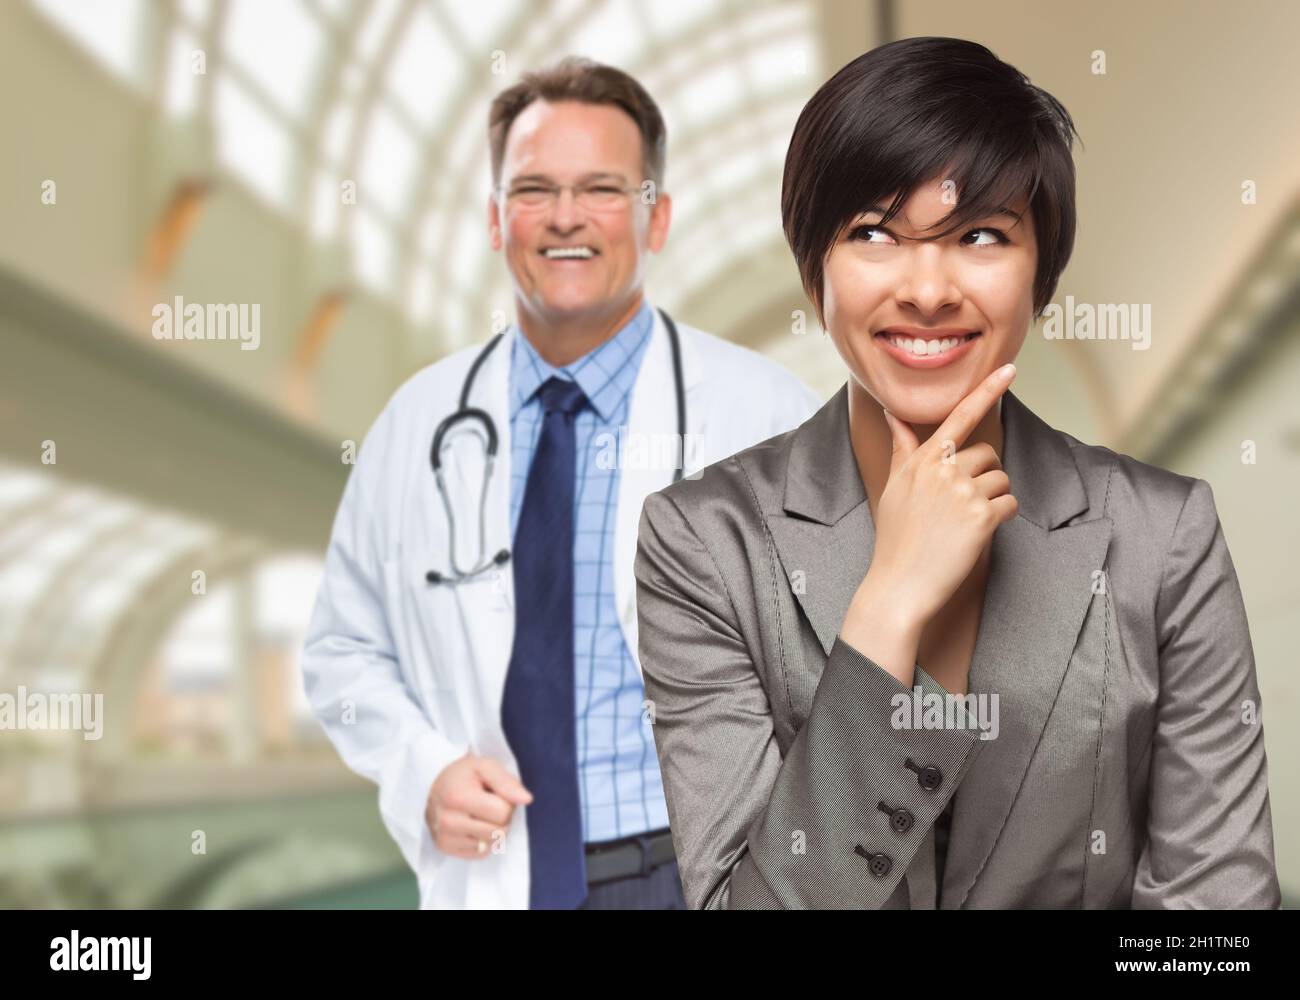 Happy Mixed Race Woman Looking To The Side As Male Doctor Stands Behind Her Inside Hospital. Stock Photo